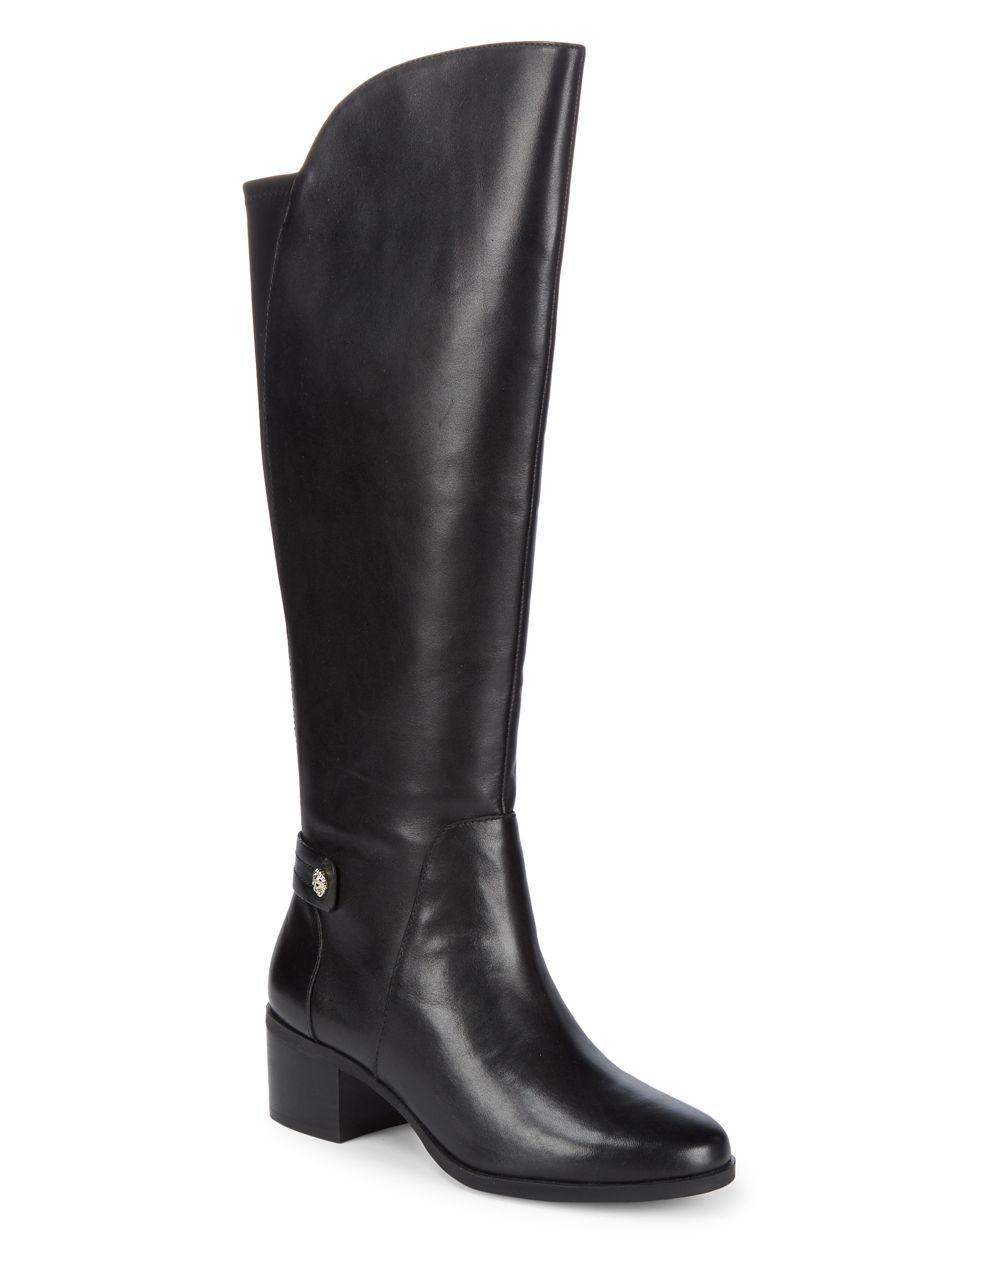 Lyst - Anne Klein Jelaw Knee-high Wide Calf Leather Boots in Black